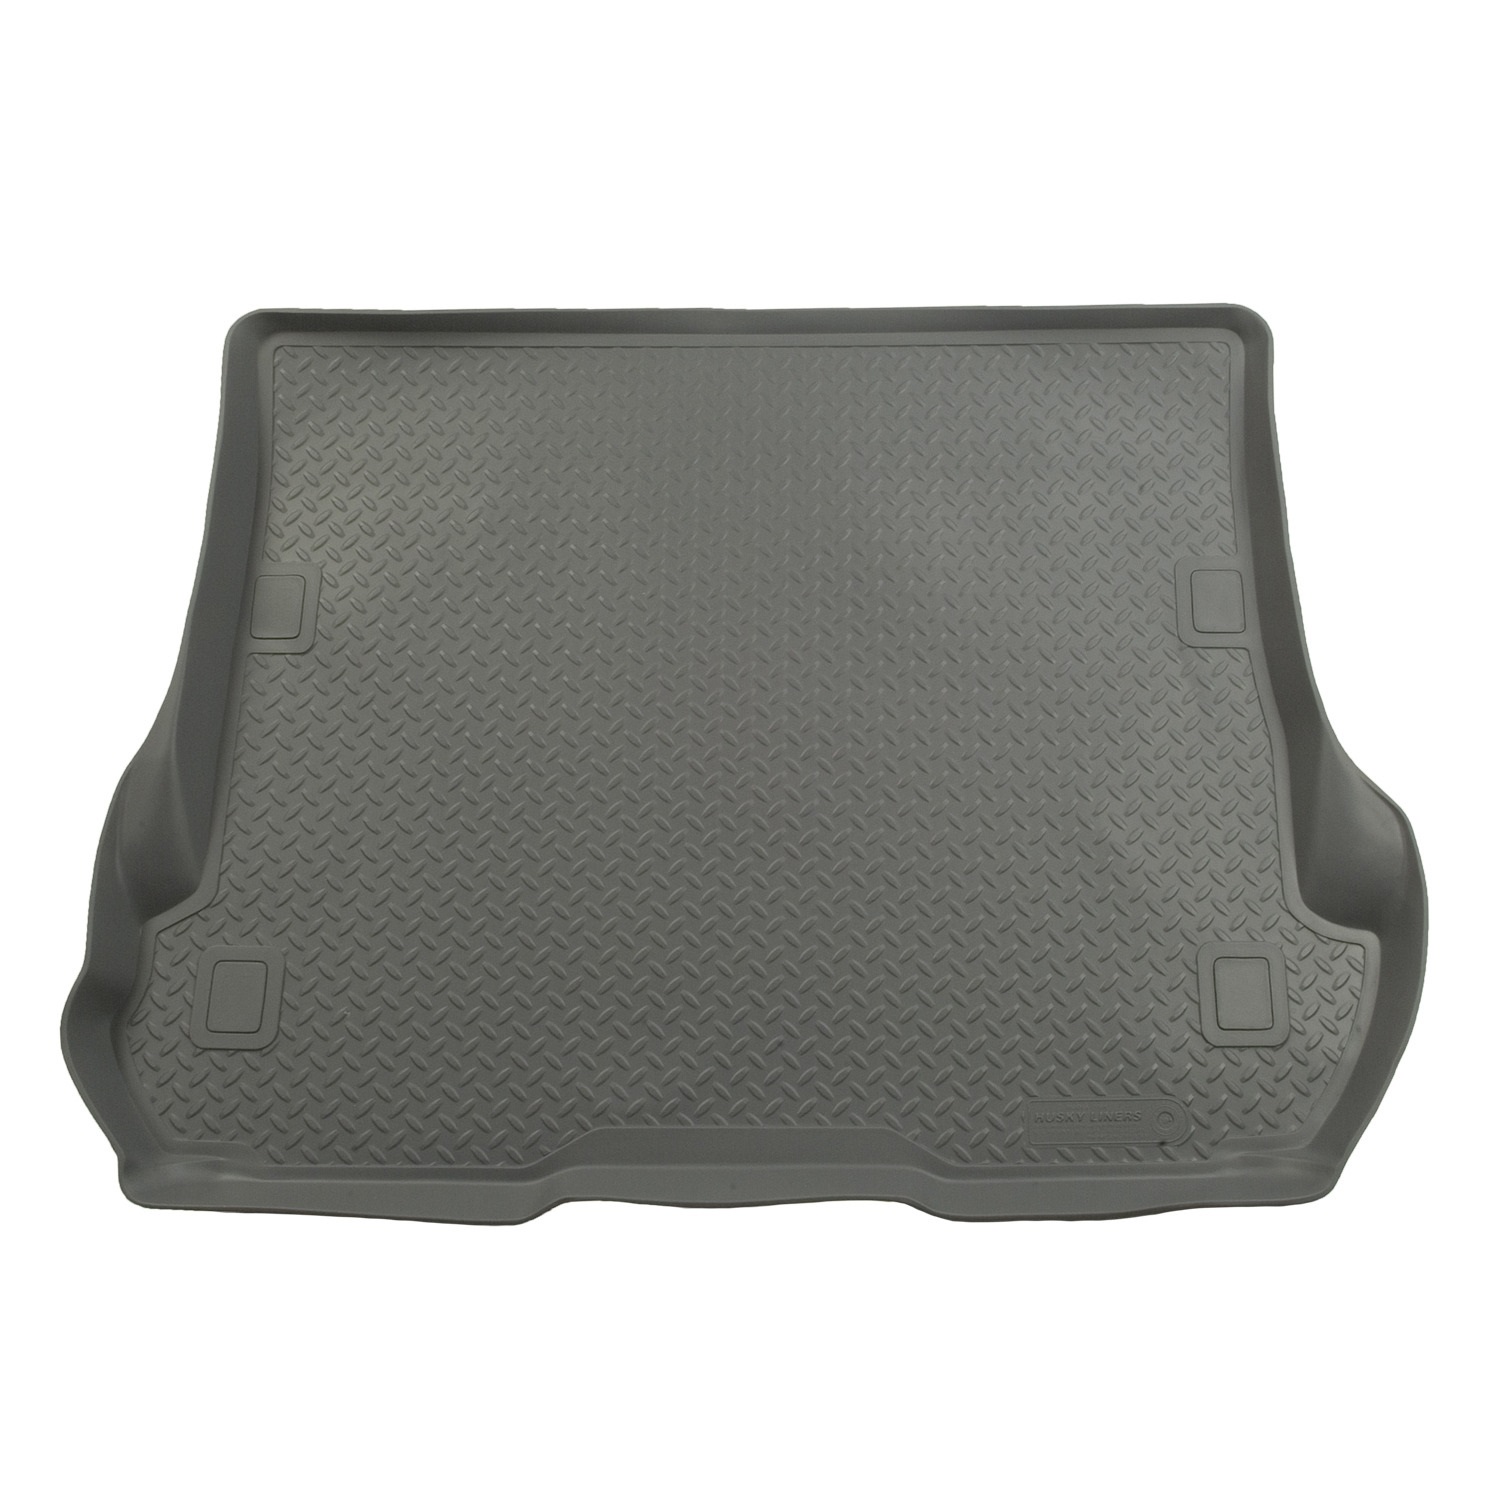 Husky Liners Husky Liners 24652 Classic Style; Cargo Liner Fits 07-11 CR-V